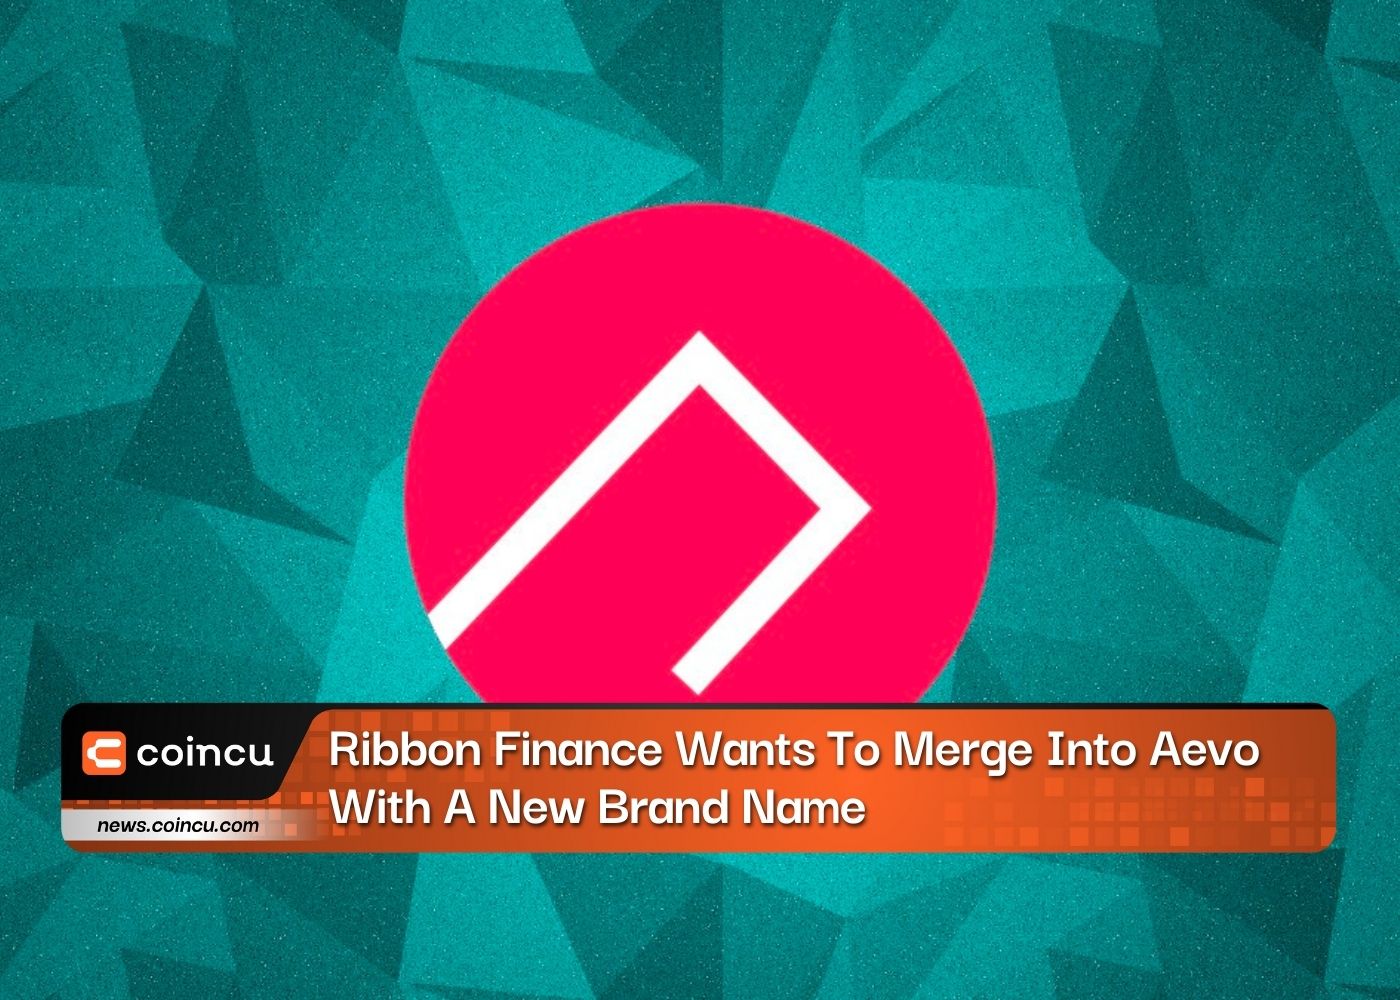 Ribbon Finance Wants To Merge Into Aevo With A New Exclusive Brand Name